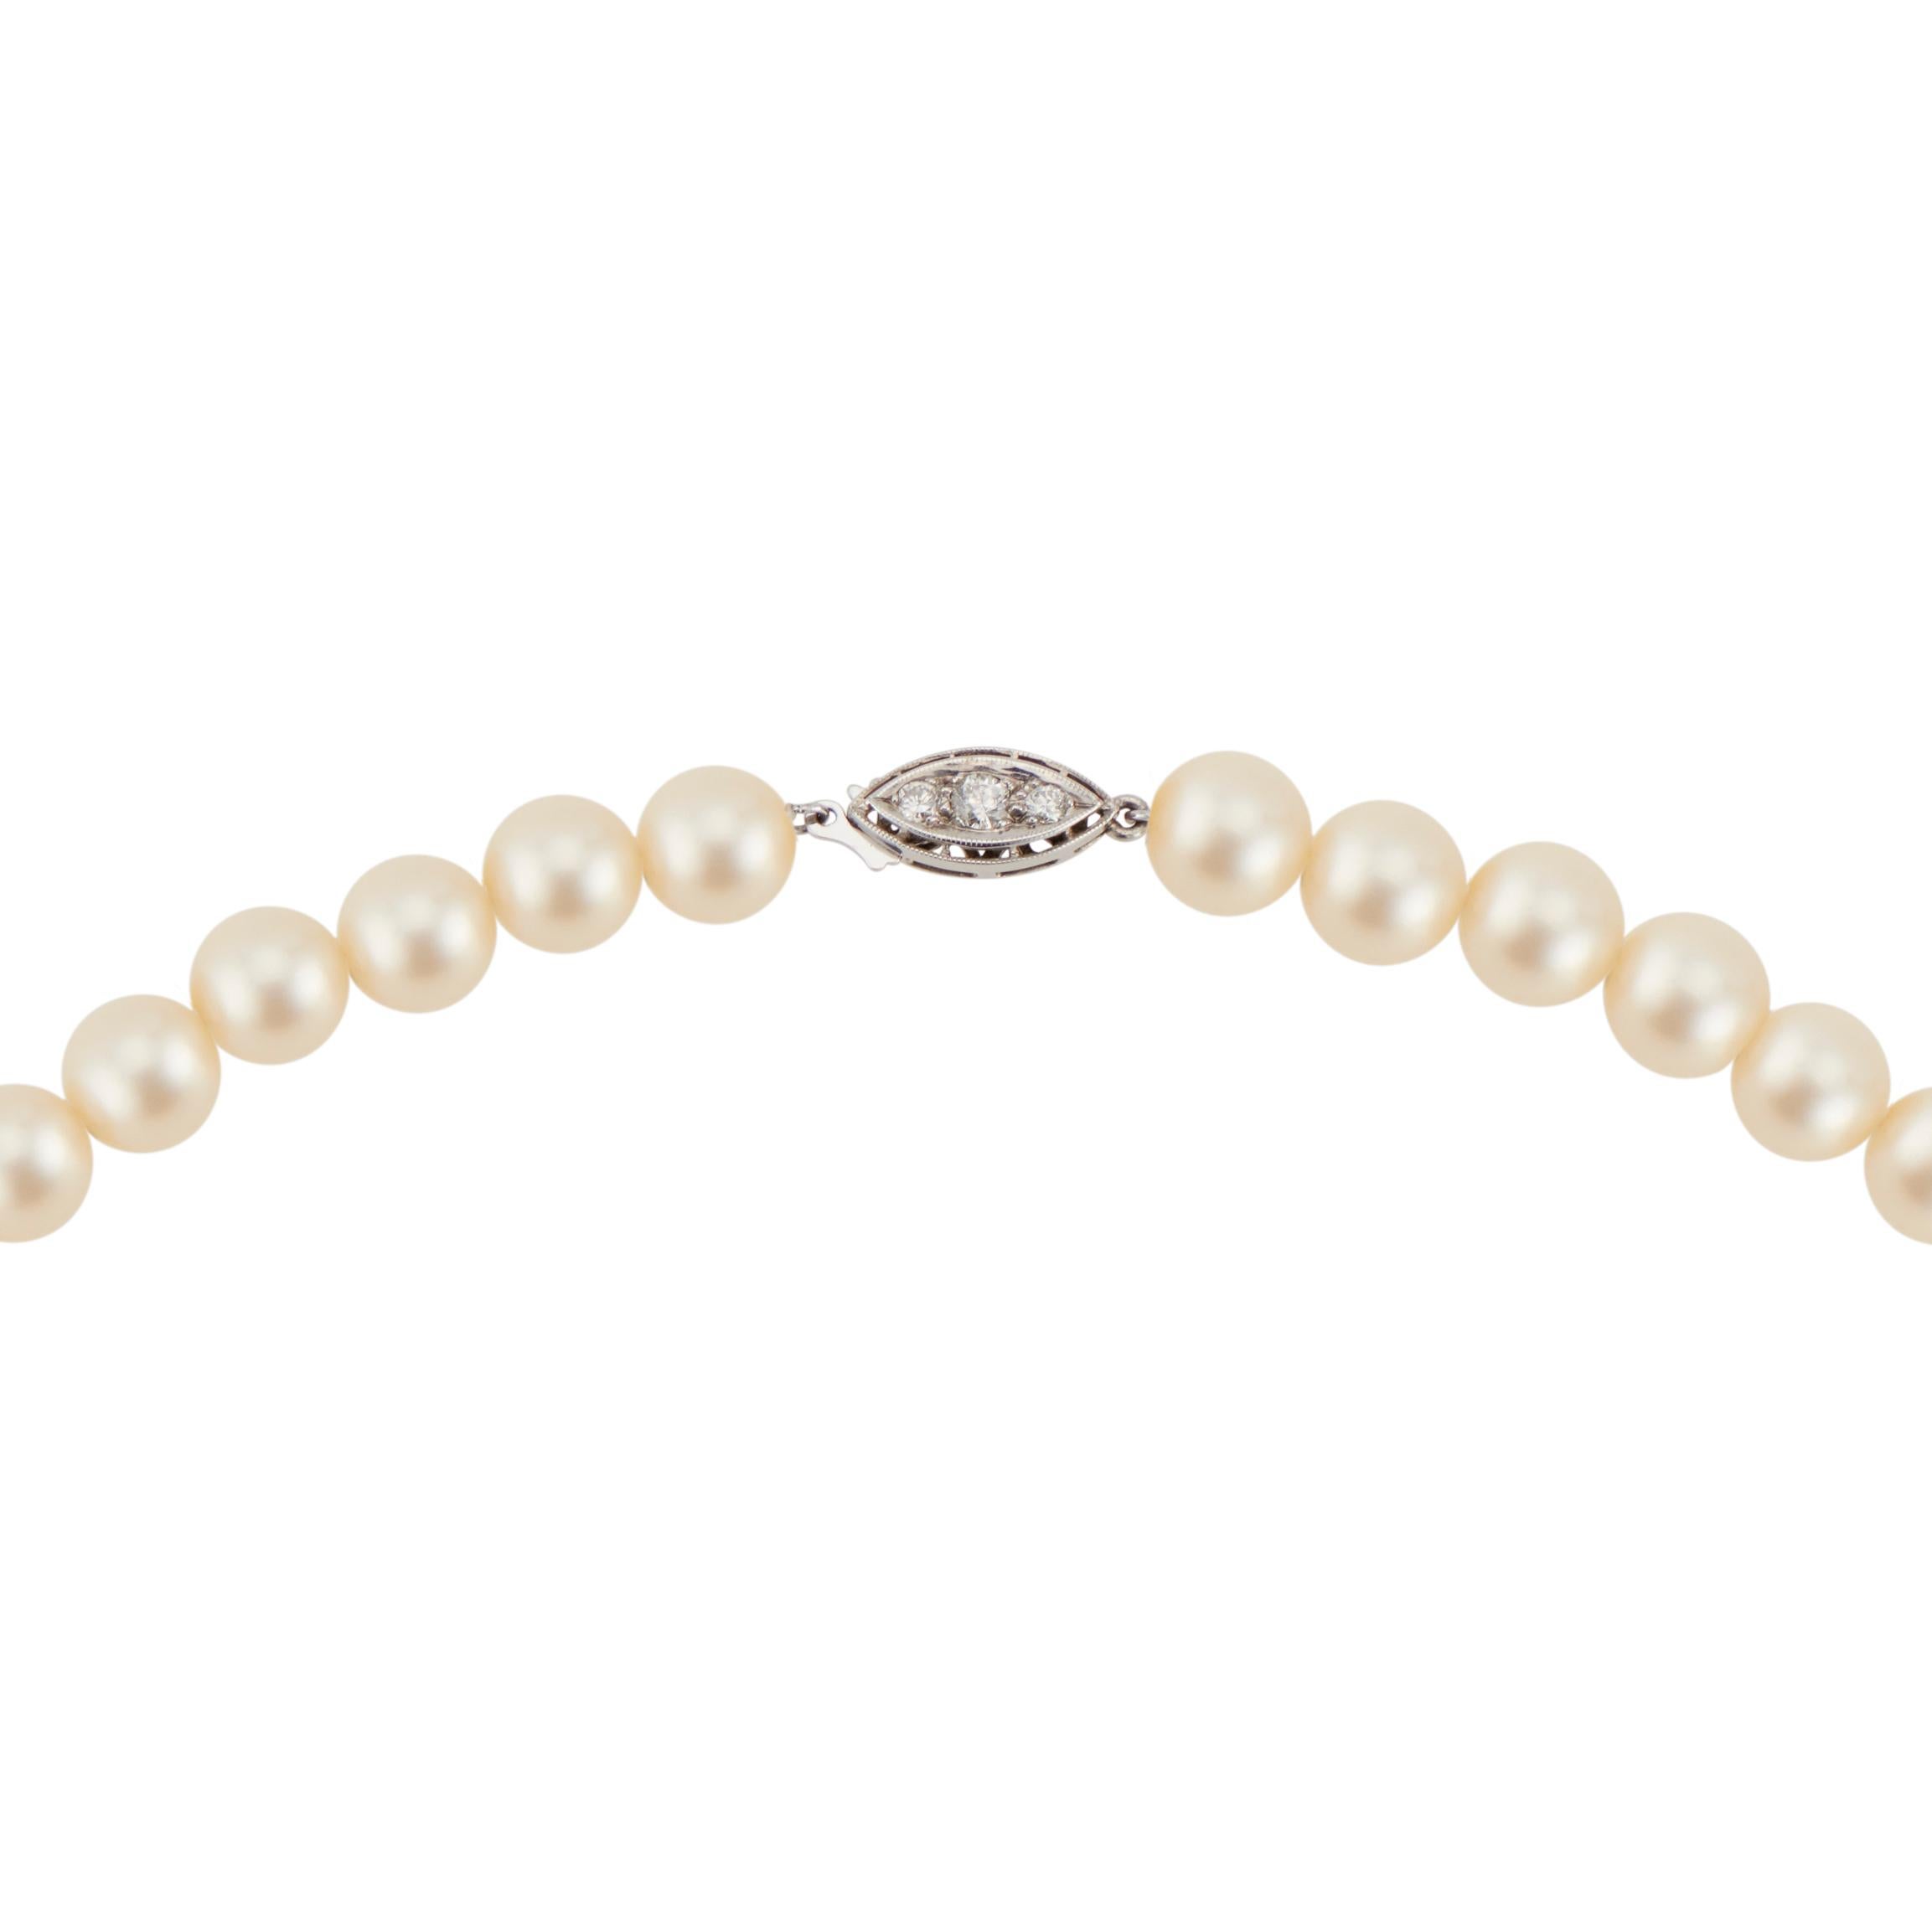 1960’s graduated cultured pearl necklace 6-9mm with natural color and 14k white gold diamond catch. 16.5 inches long. 

55 cultured pearls, crème color rose hue, very good lustre, few blemishes 6-9mm
3 round brilliant cut diamonds, H-I SI approx.